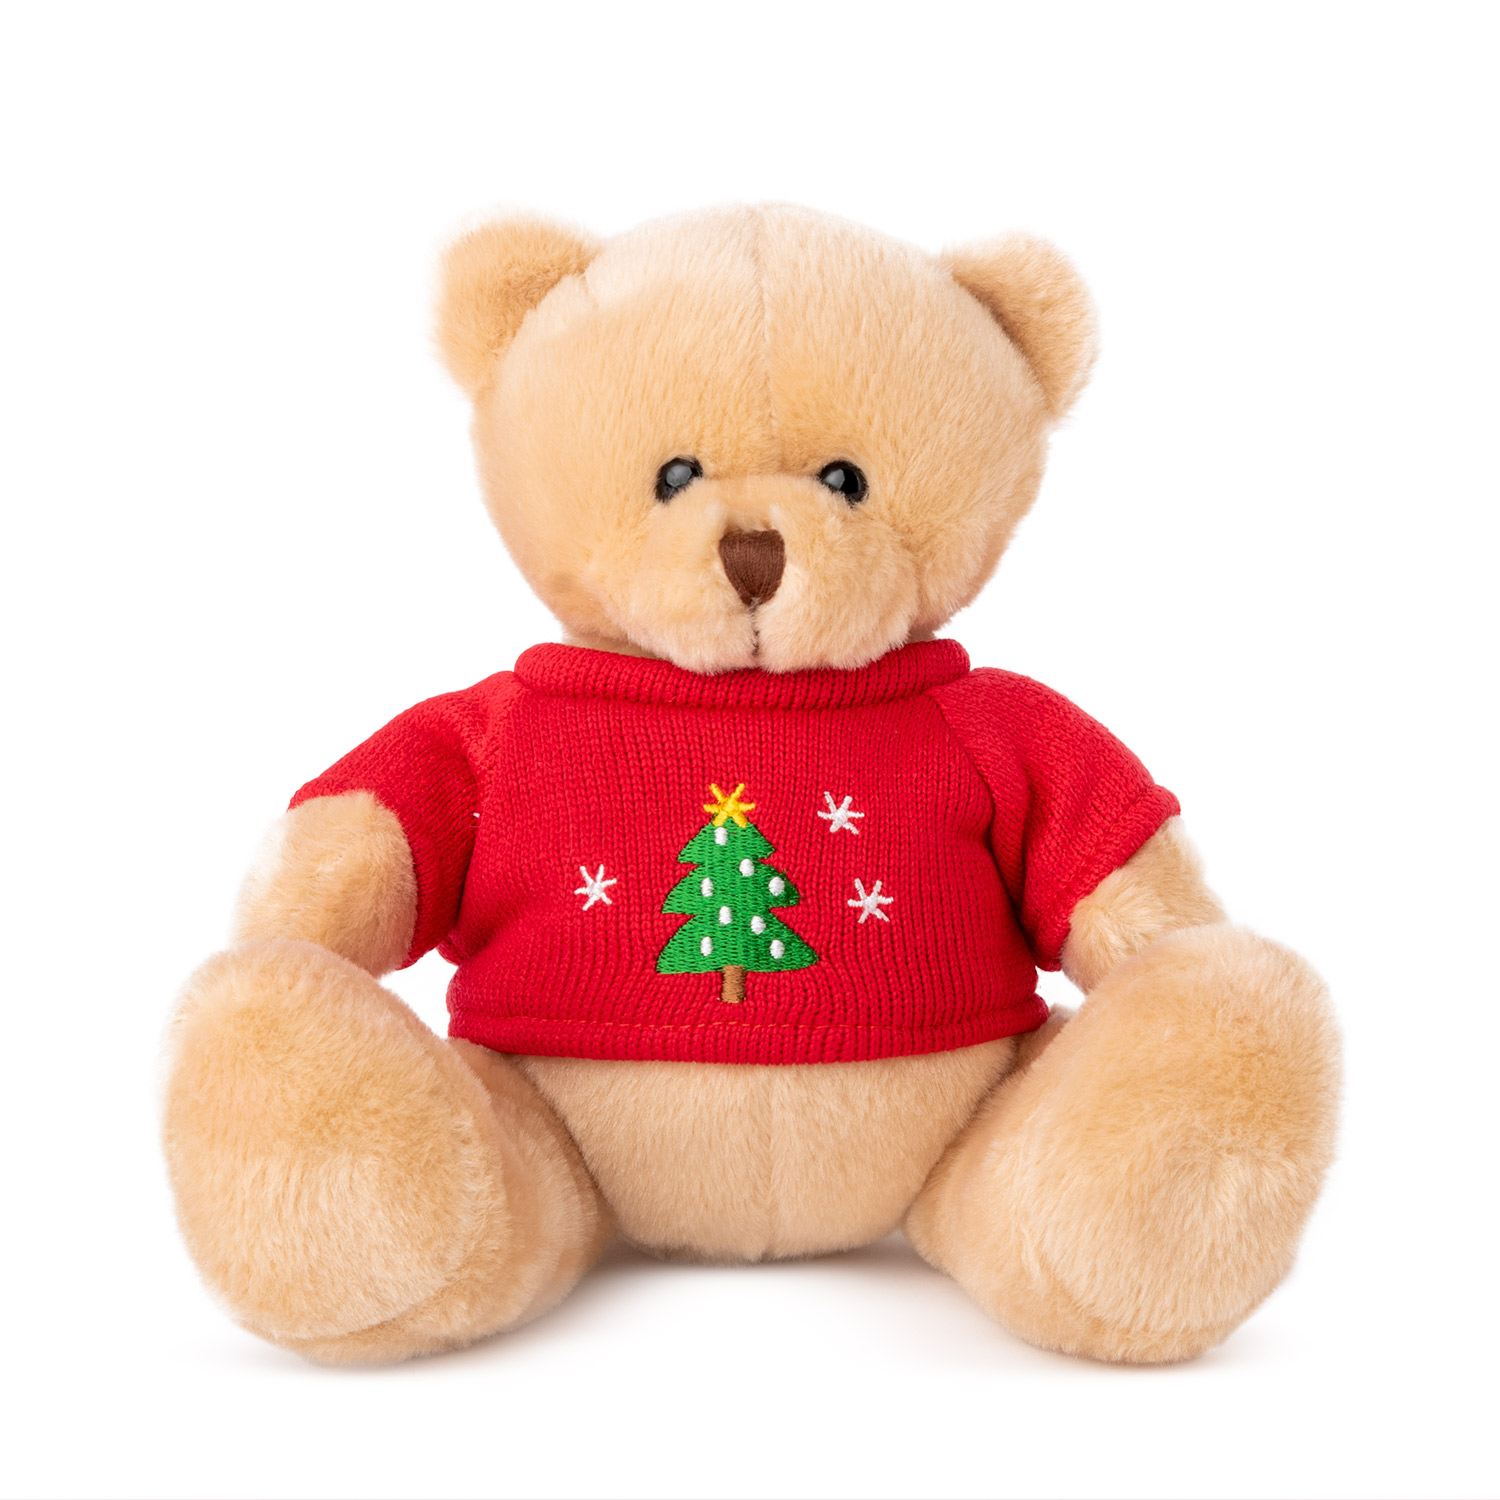 Bear with Christmas sweater - Beige